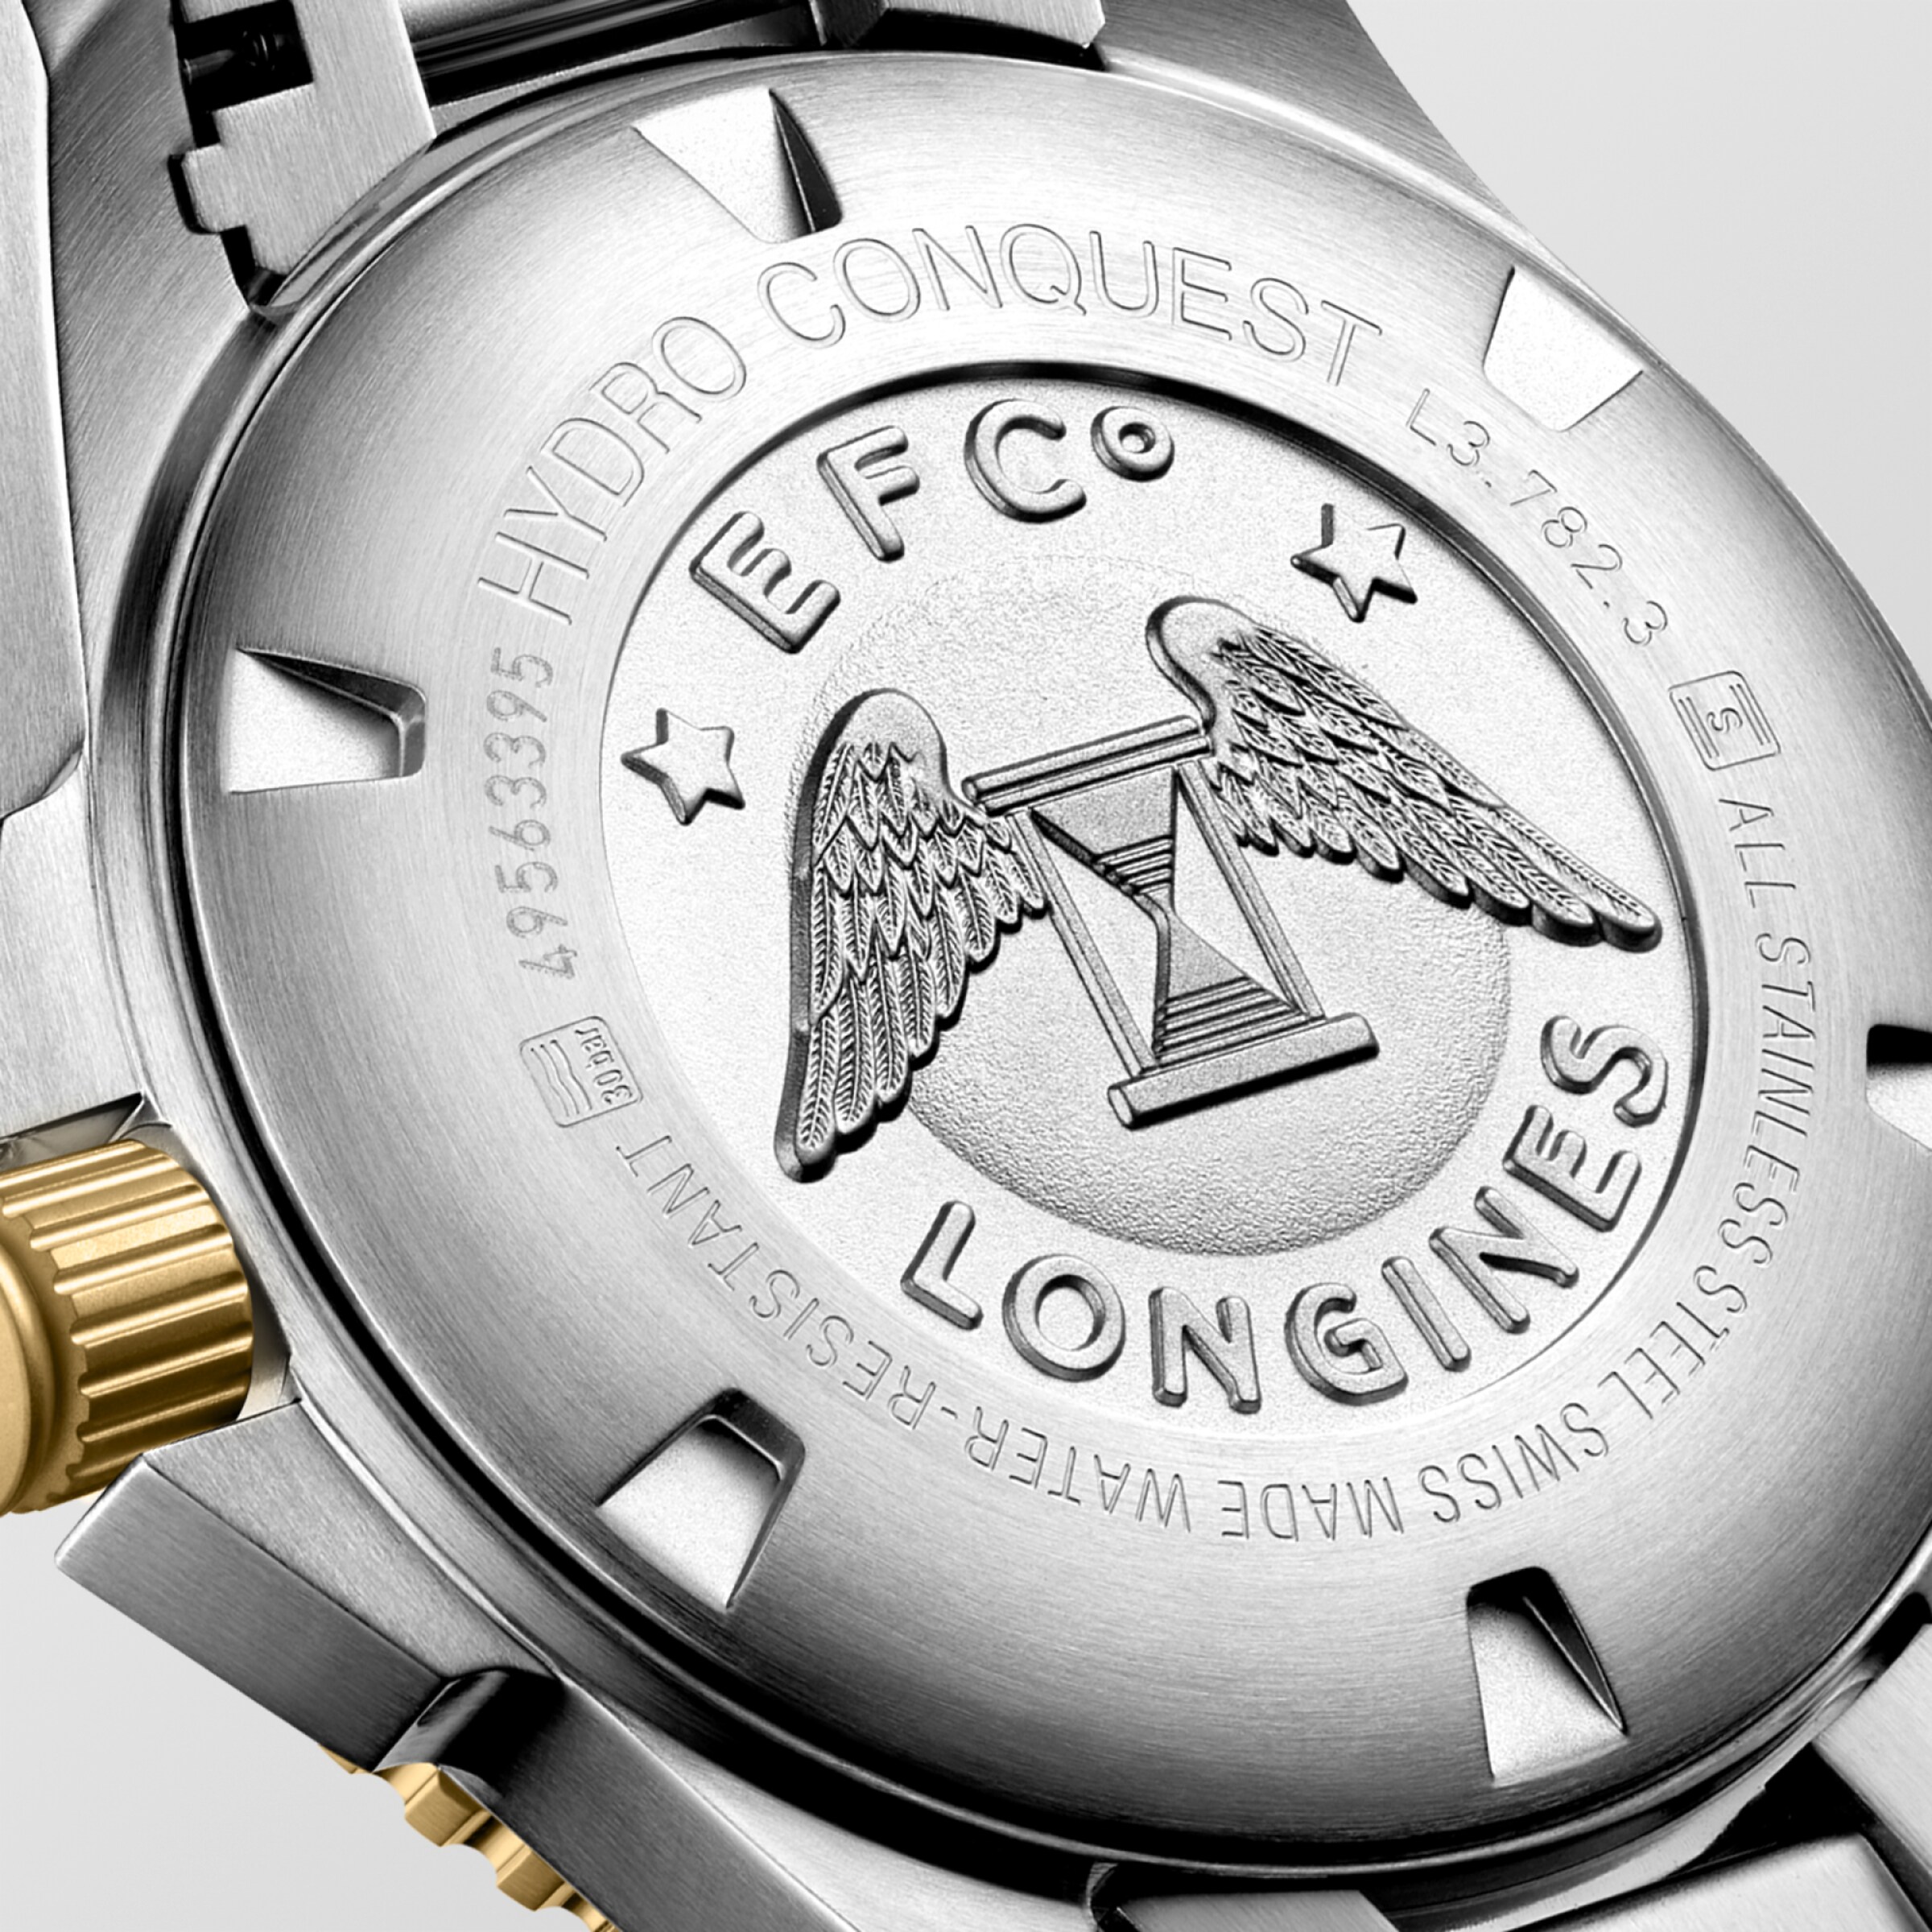 Longines HYDROCONQUEST Automatic Stainless steel and ceramic bezel Watch - L3.782.3.06.7